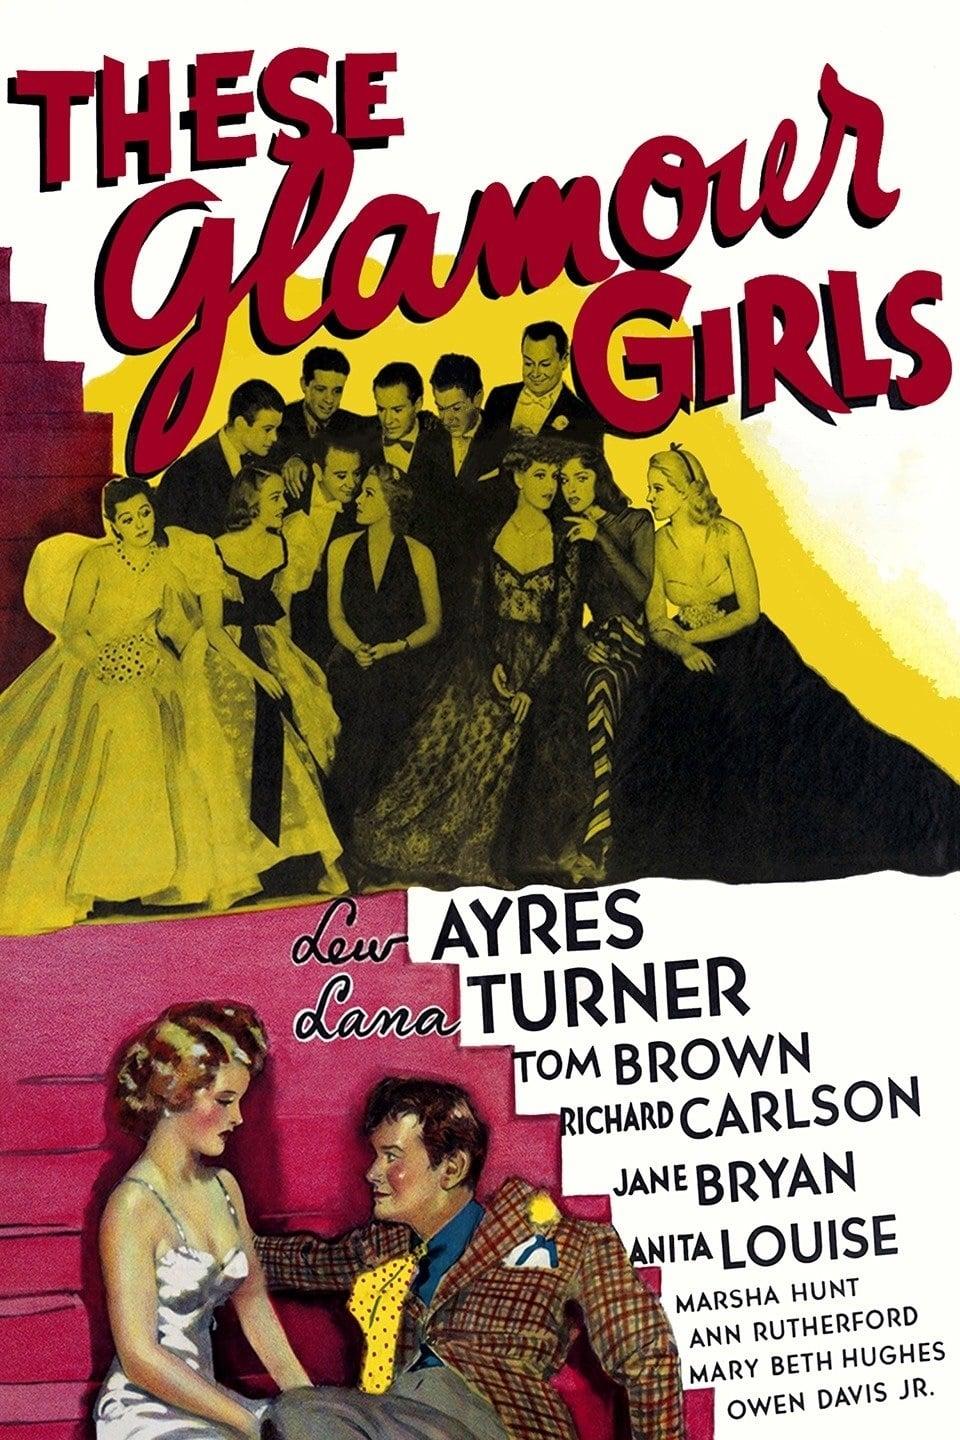 These Glamour Girls poster